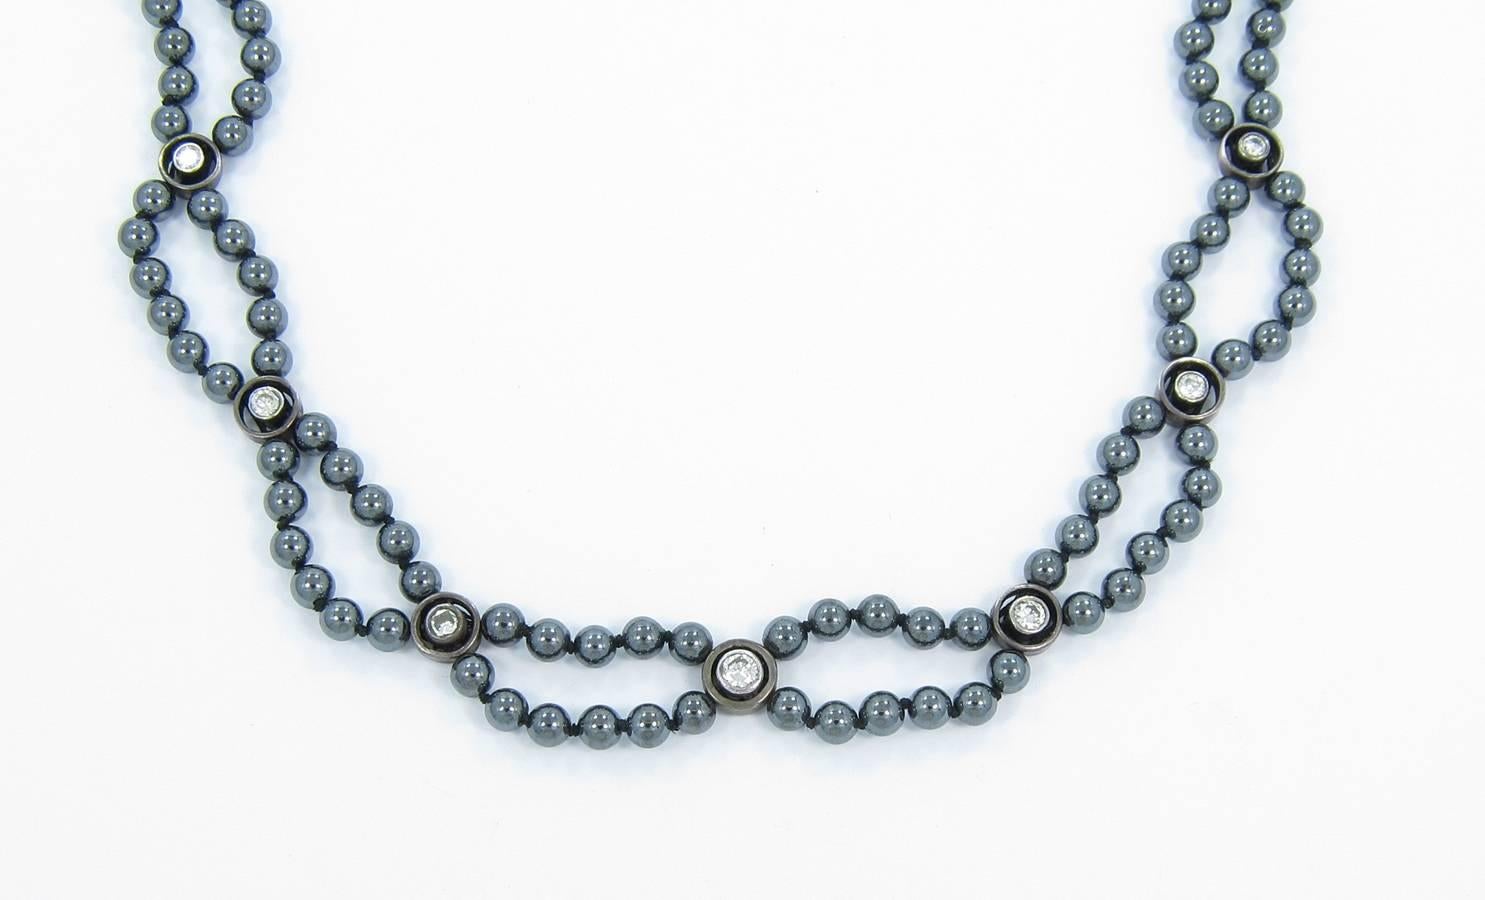 We are pleased to offer this Hematite bead necklace. All beads average 4.32mm in diameter and are held together by black, knotted cord. There are 8 diamonds on this necklace, each bezel set in sterling silver. All diamonds are old cut and graduate